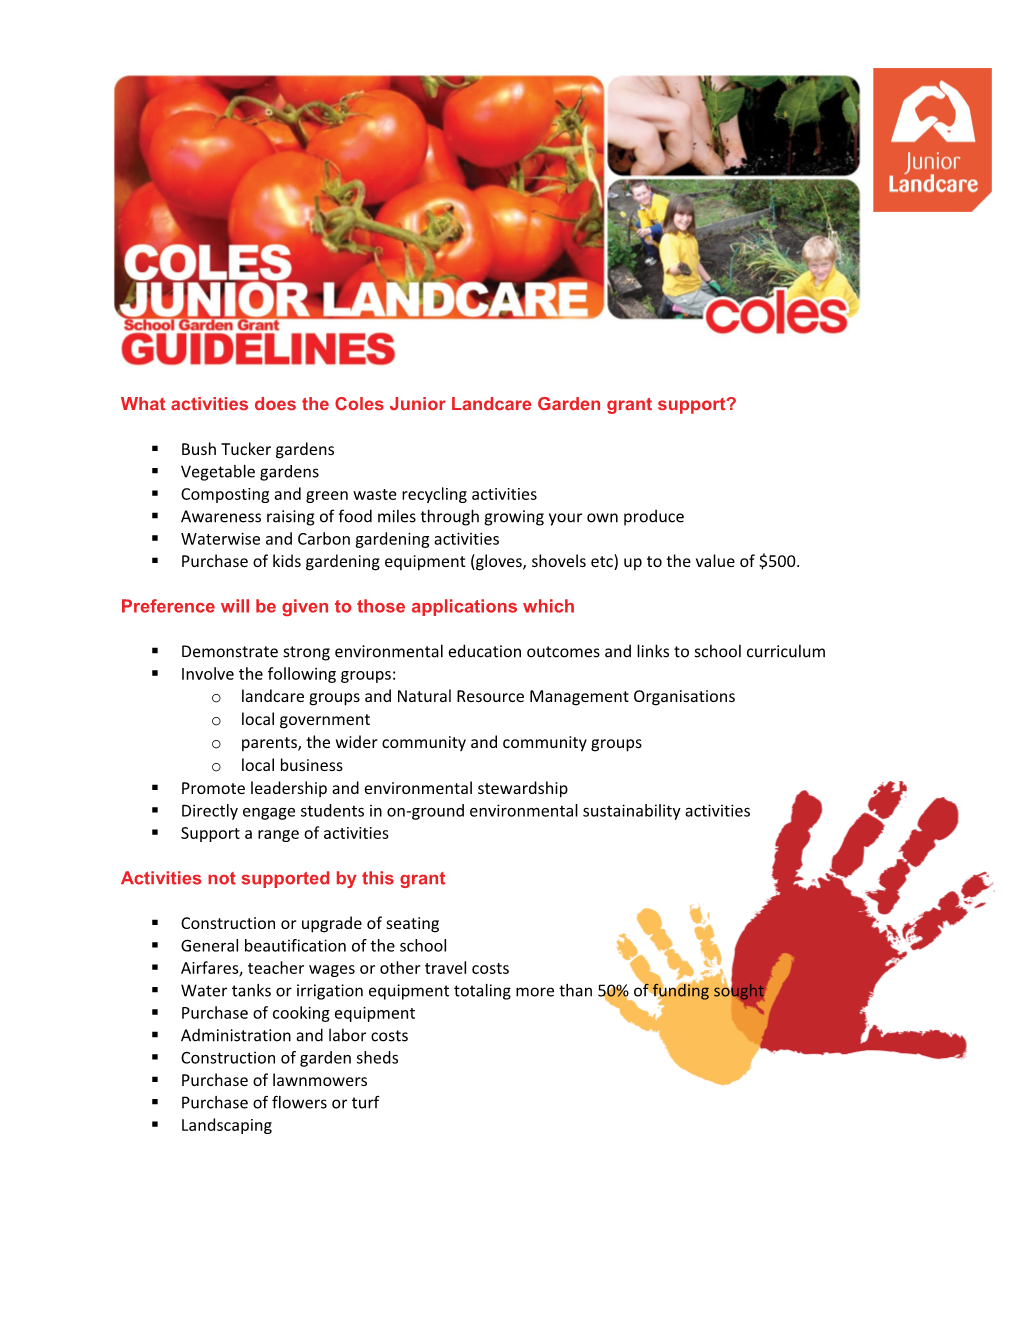 What Activities Does the Coles Junior Landcare Garden Grant Support?